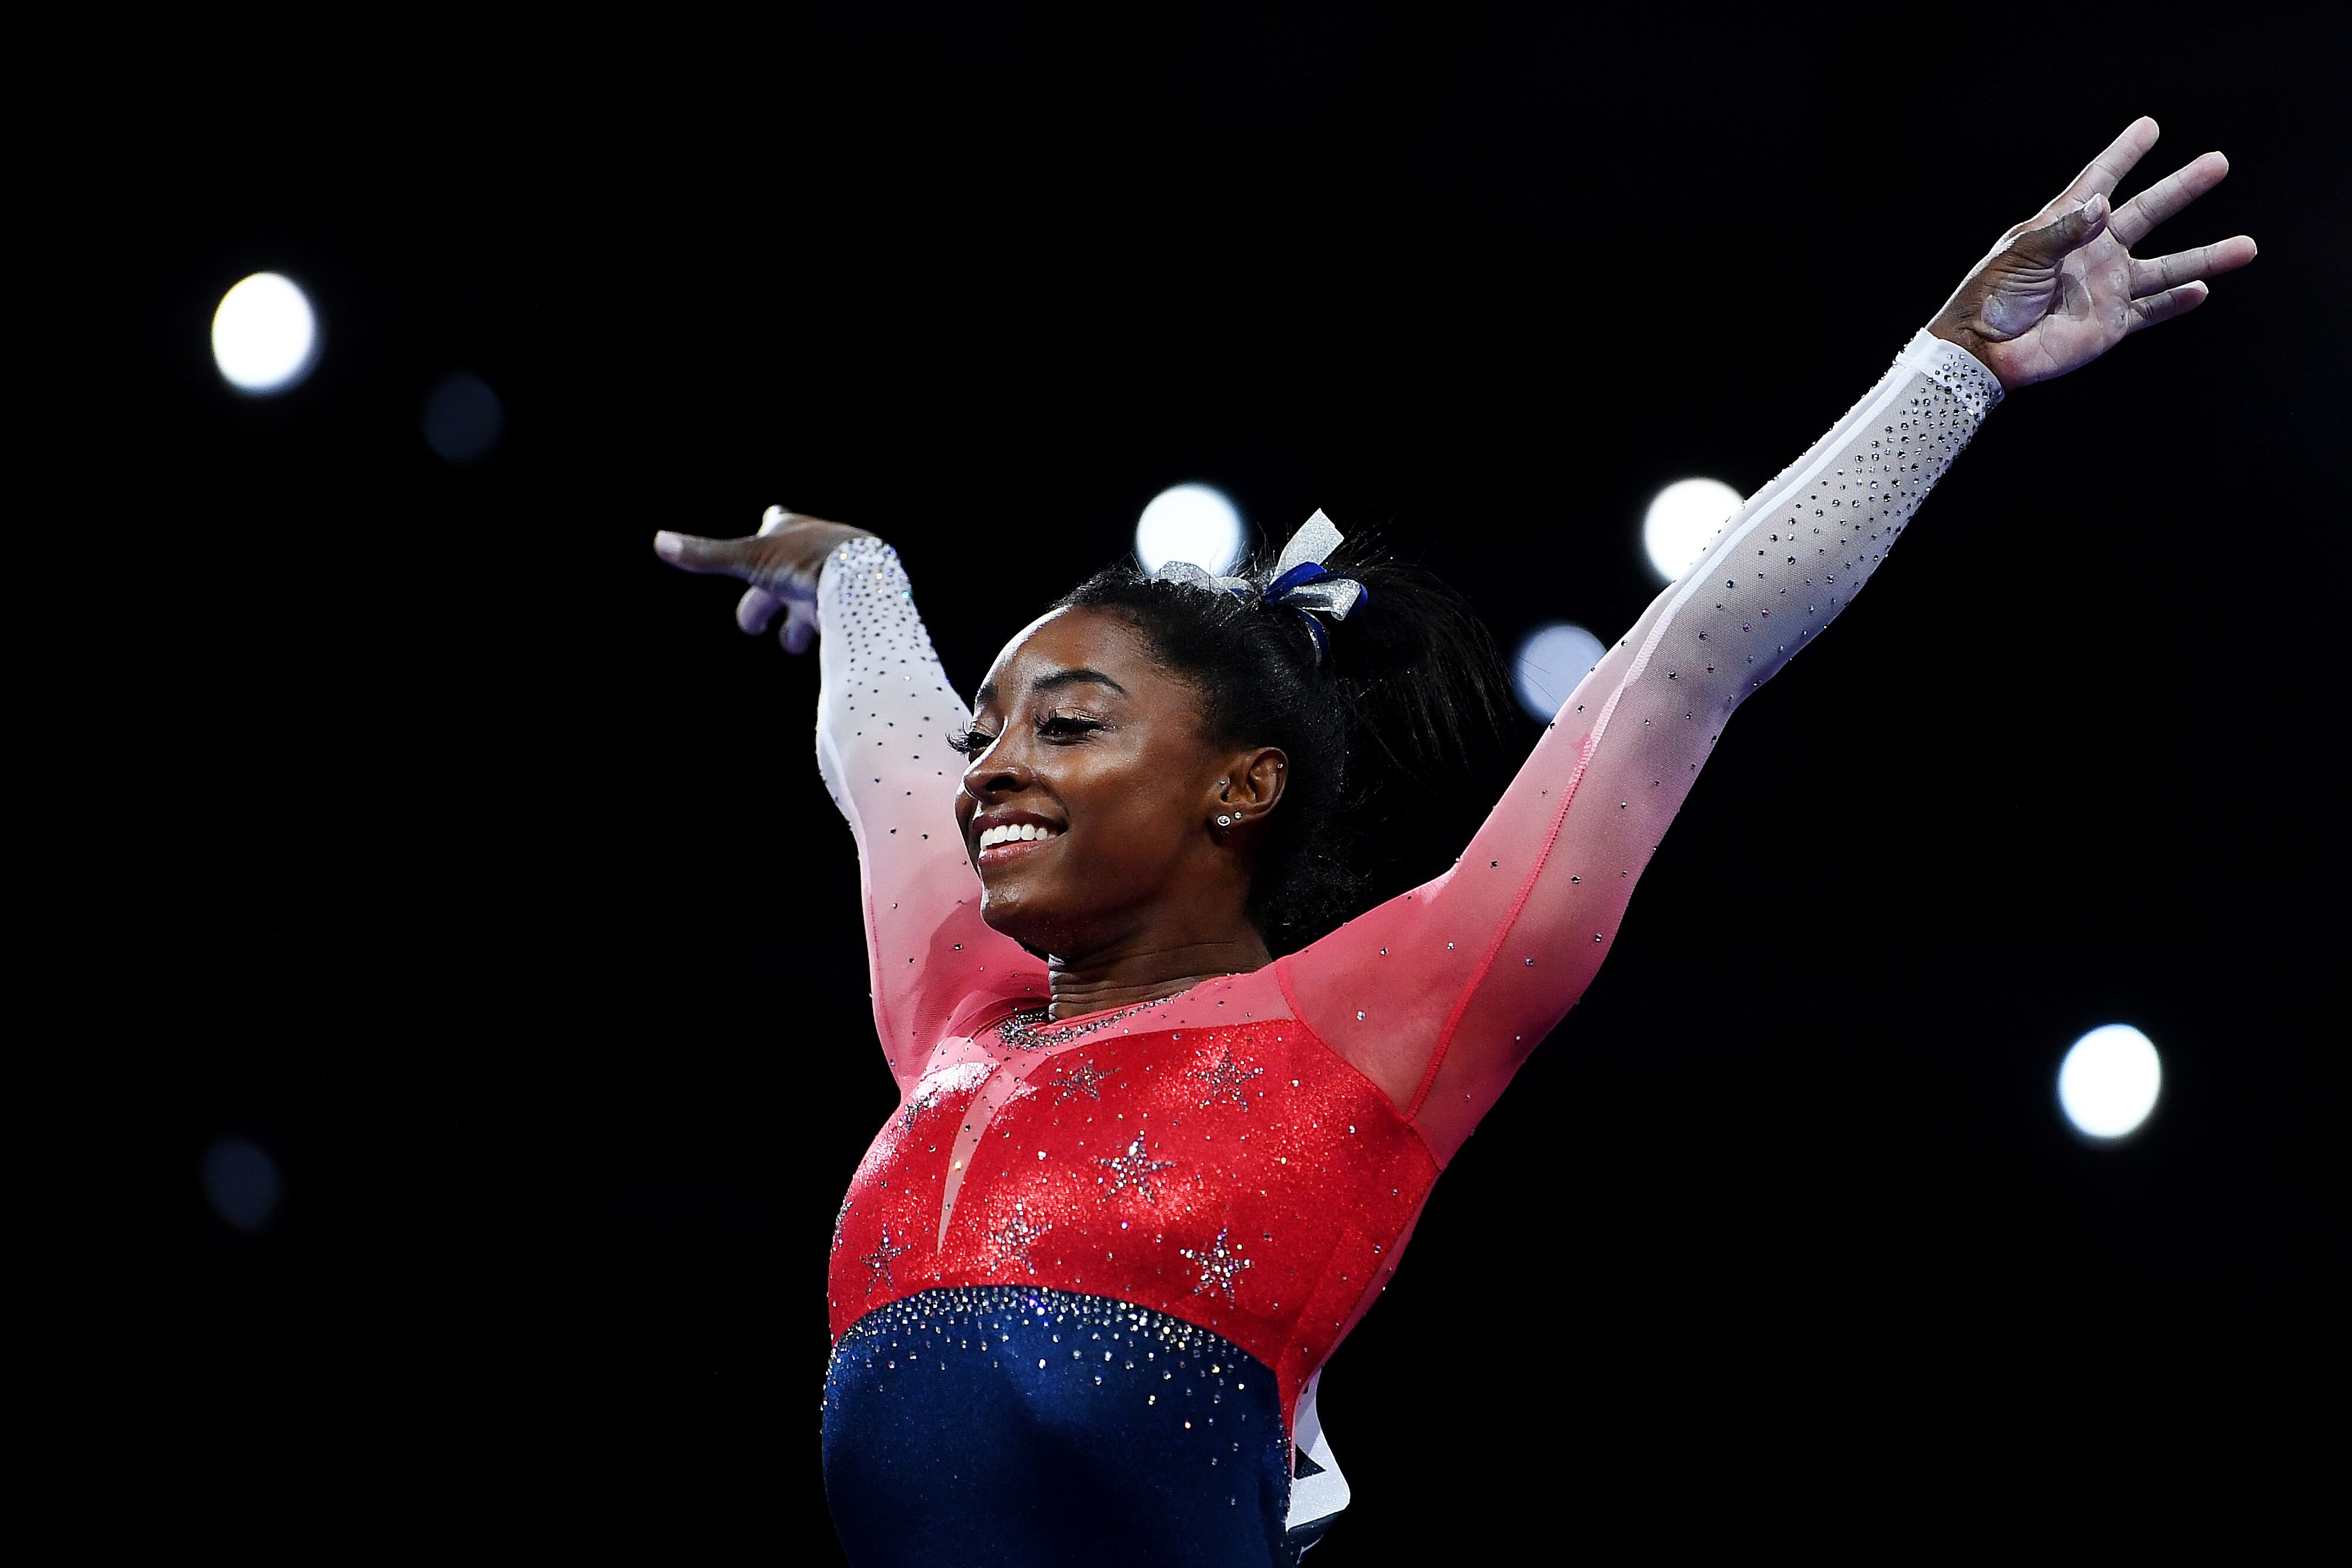 Simone Biles during the FIG Artistic Gymnastics World Championships on Oct. 08, 2019 in Germany | Source: Getty Images